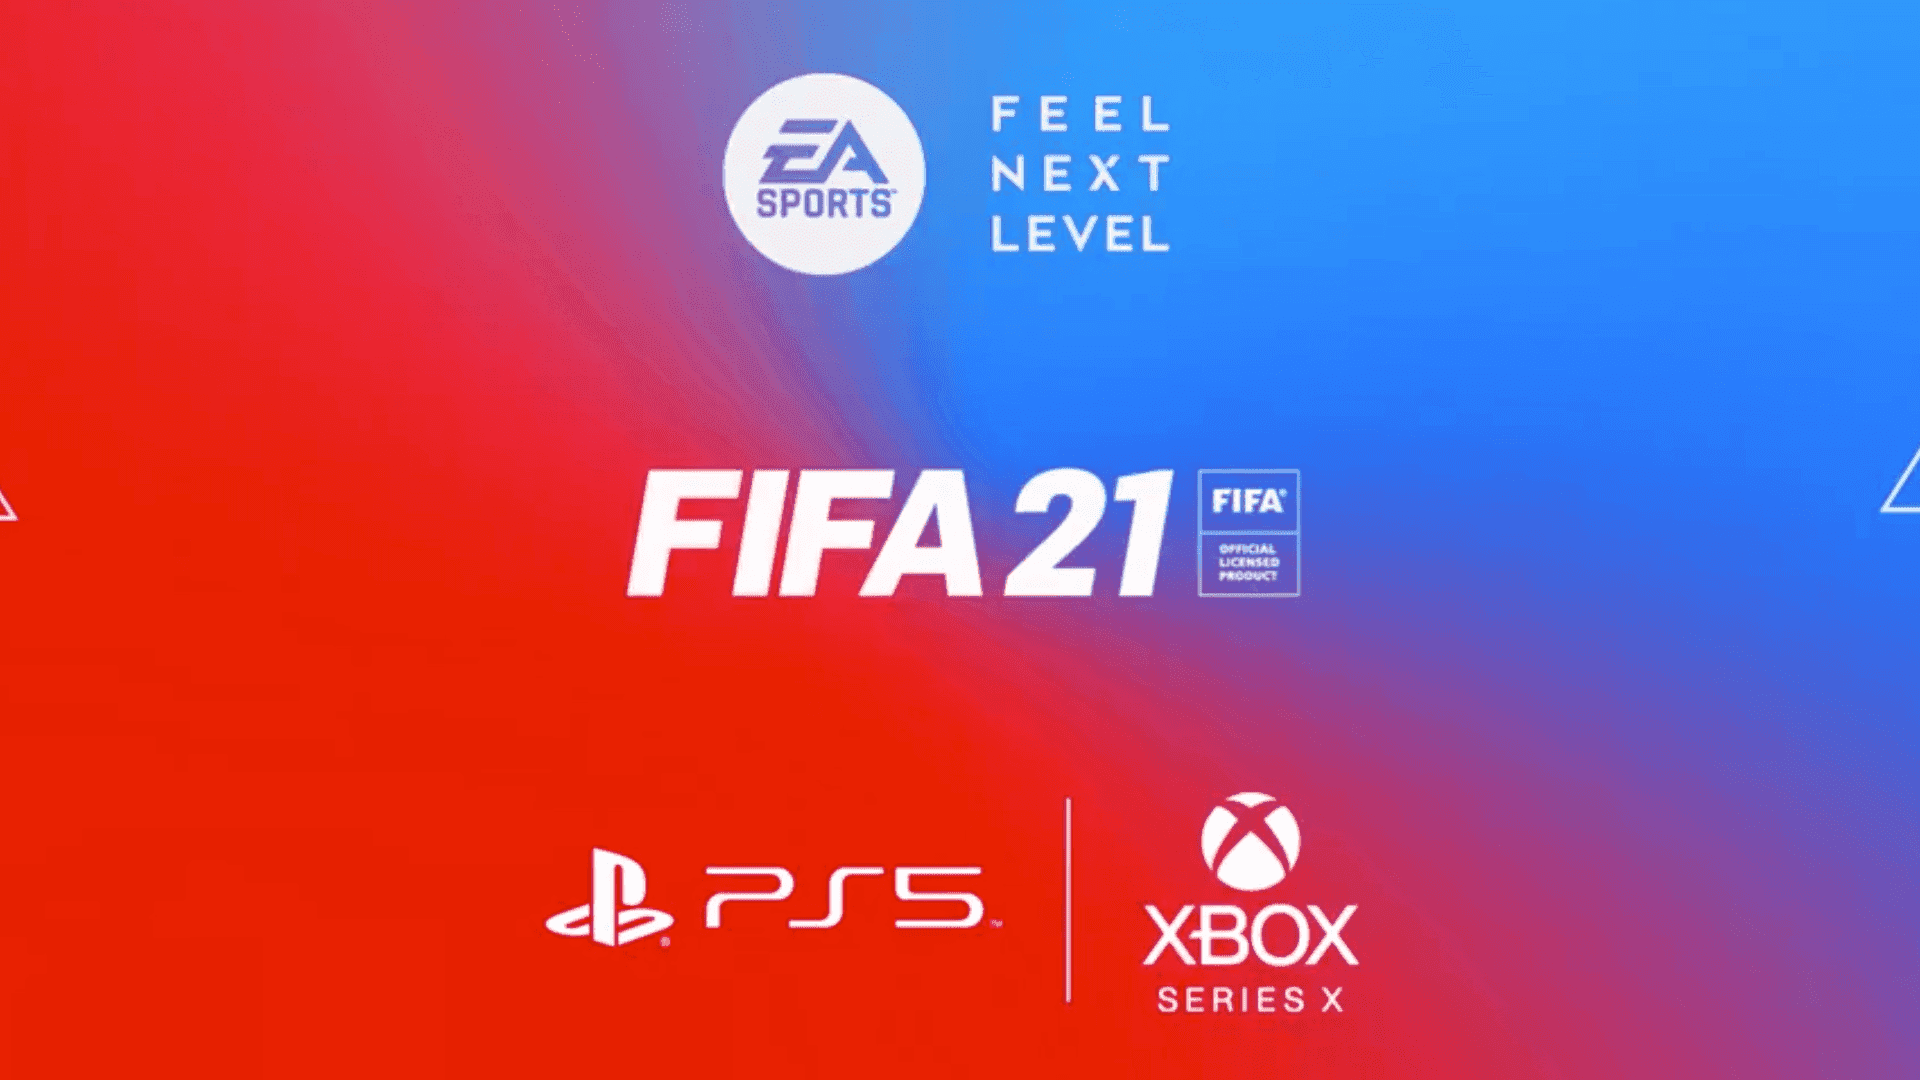 Outplay your opponents in FIFA 21!